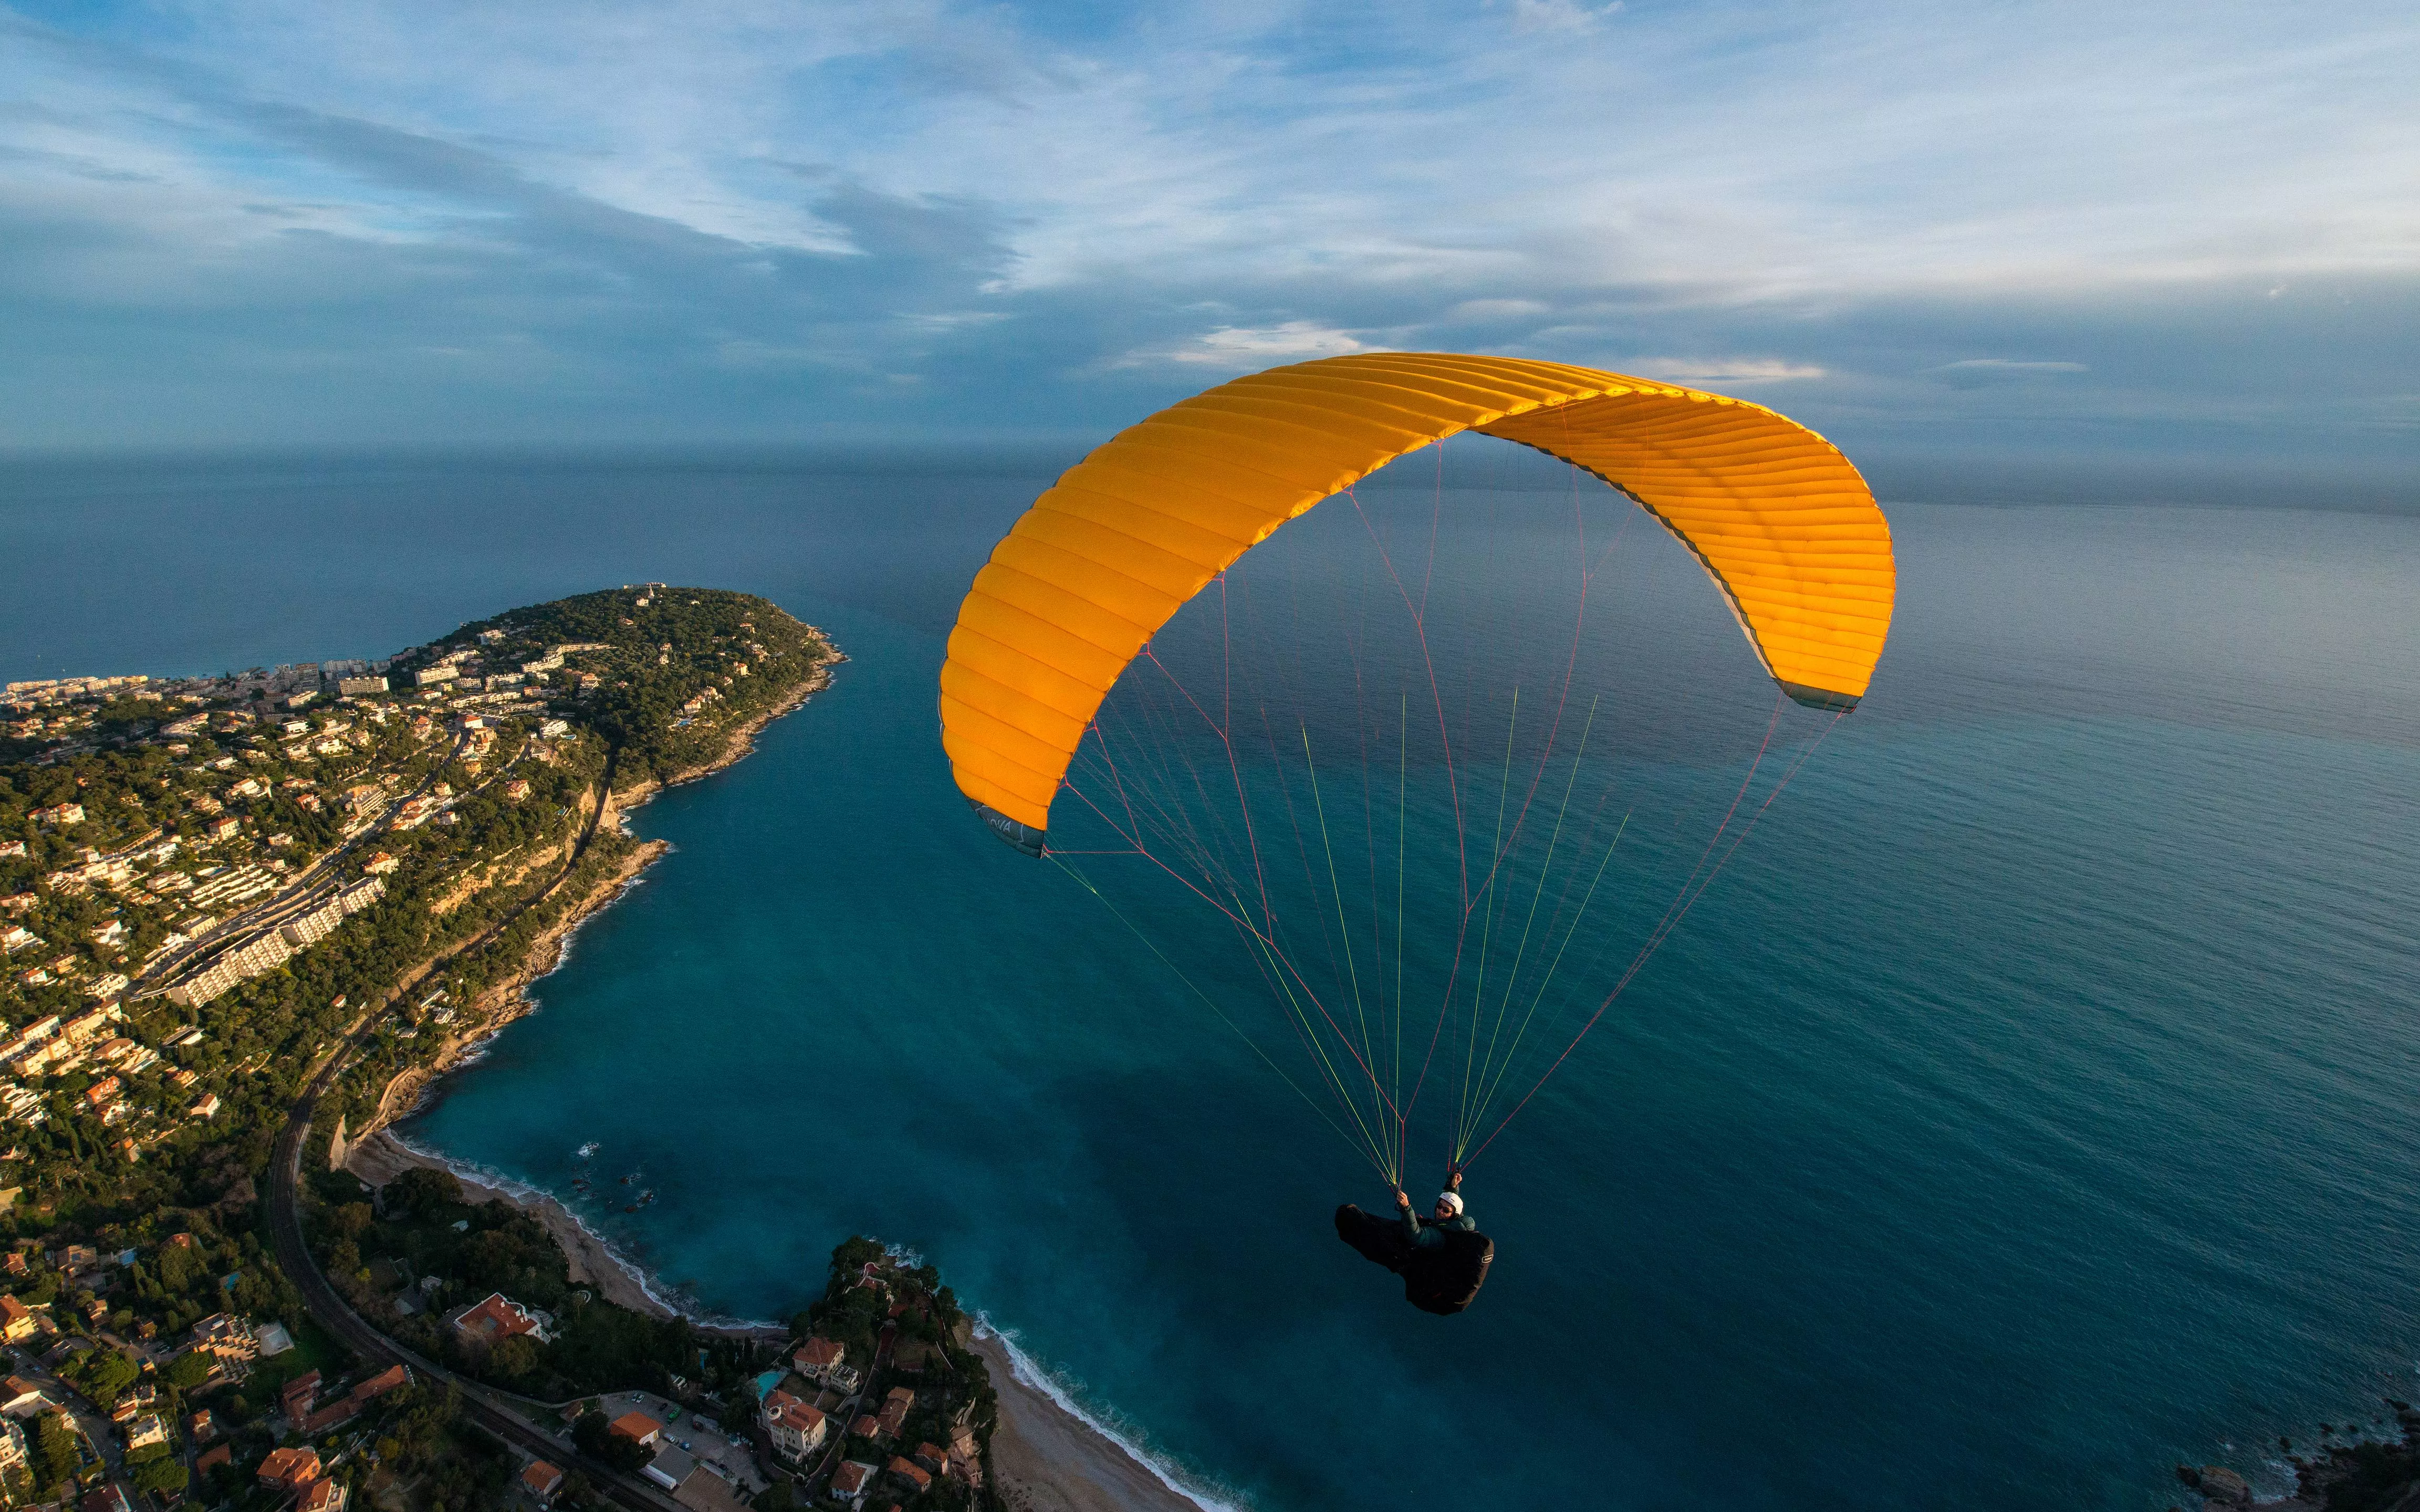 Fly Royal Paragliding in Germany, Europe | Paragliding,Adrenaline Adventures - Rated 4.8